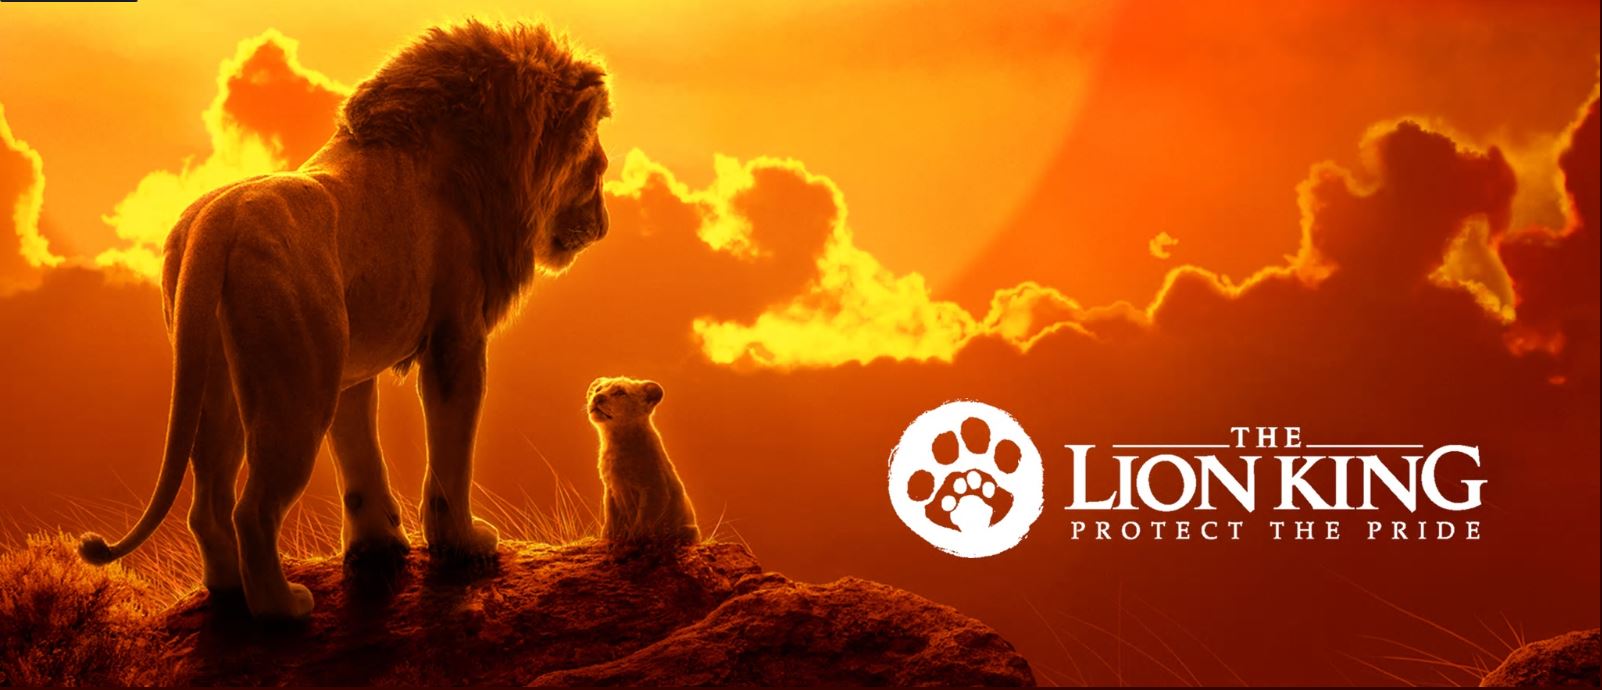 The Lion King Protect the Pride